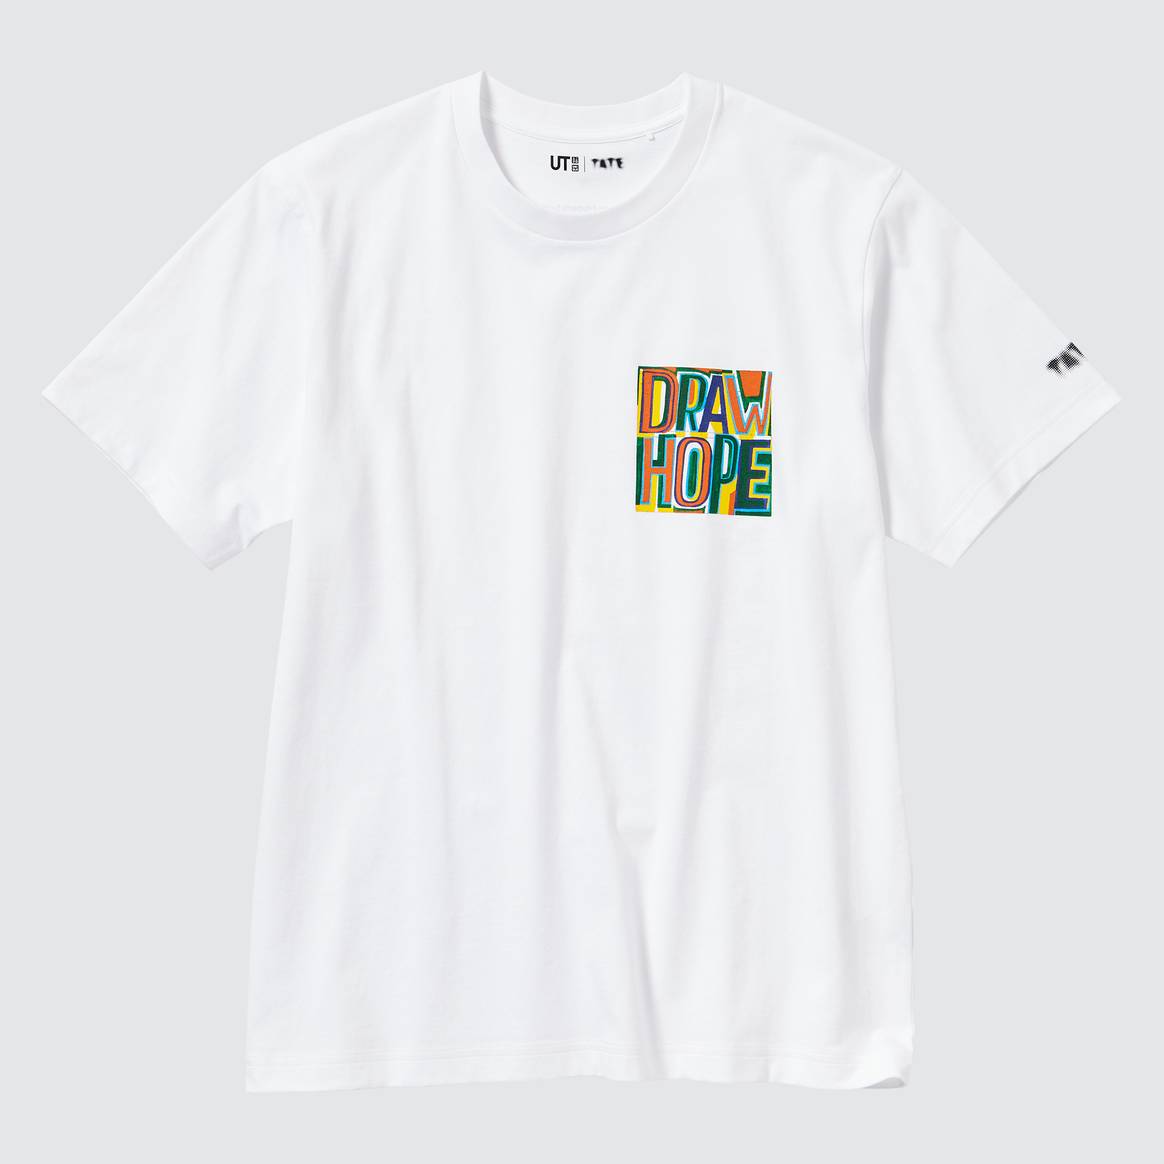 Uniqlo ‘Curated by Tate’ LifeWear collection